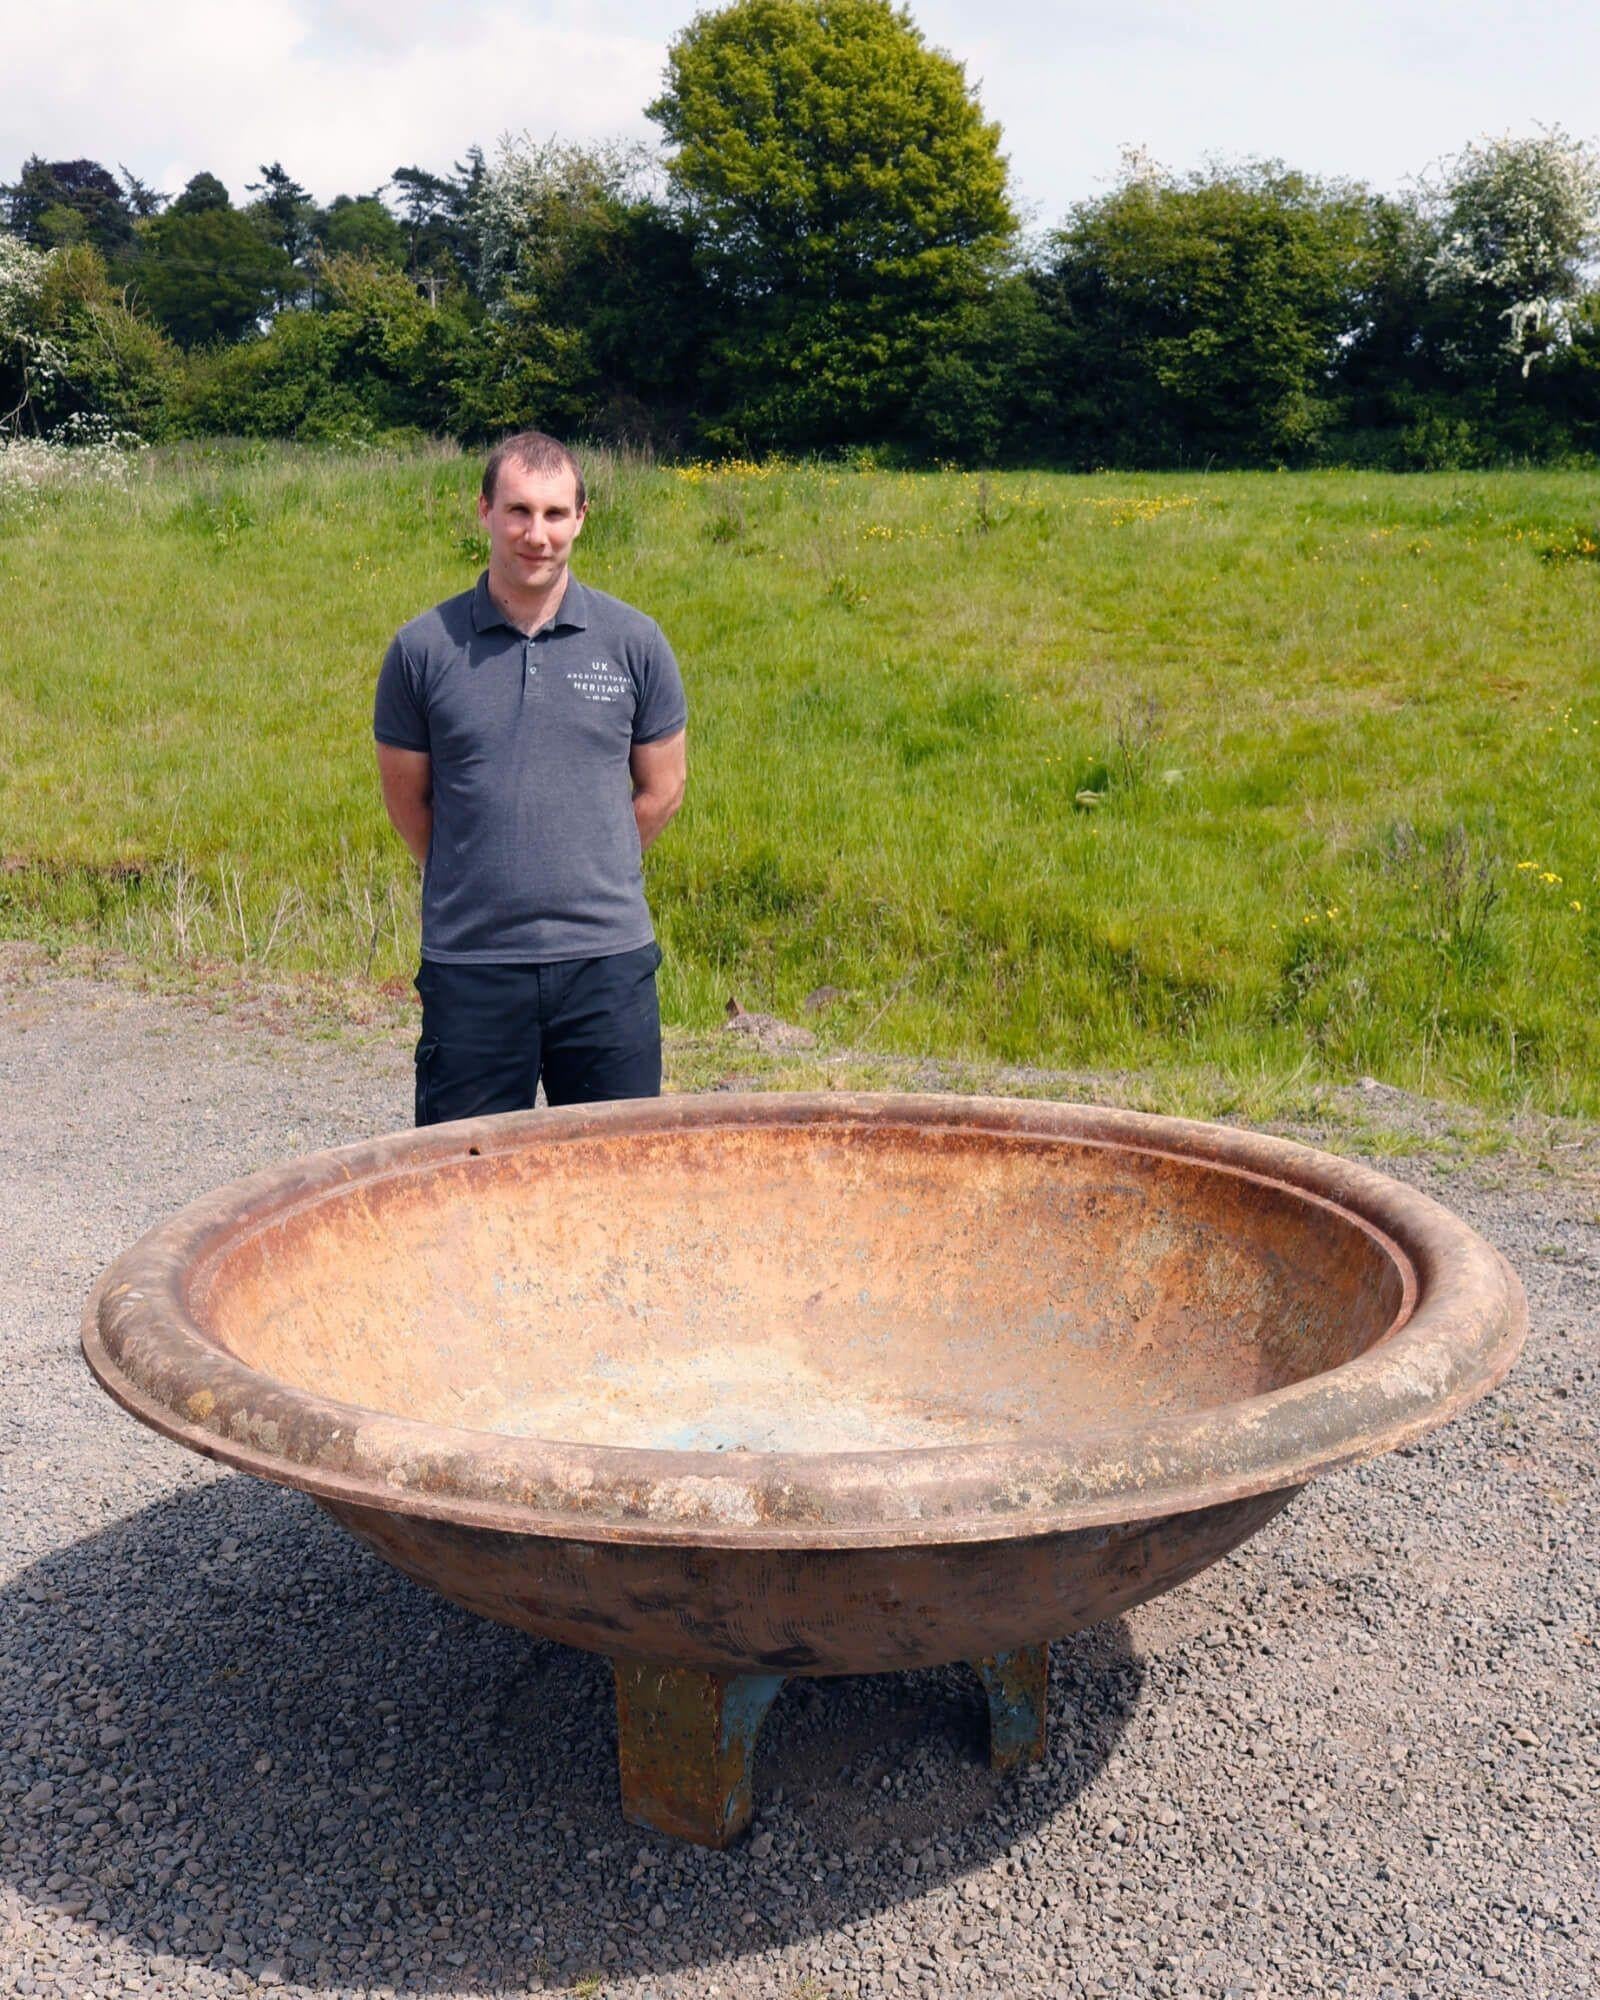 This large cast iron bowl water feature or reclaimed fountain makes a striking centrepiece in gardens traditional and contemporary. Dating from the late 19th century, it is elevated by a triform cast iron base and spans an impressive 1.8m diameter!